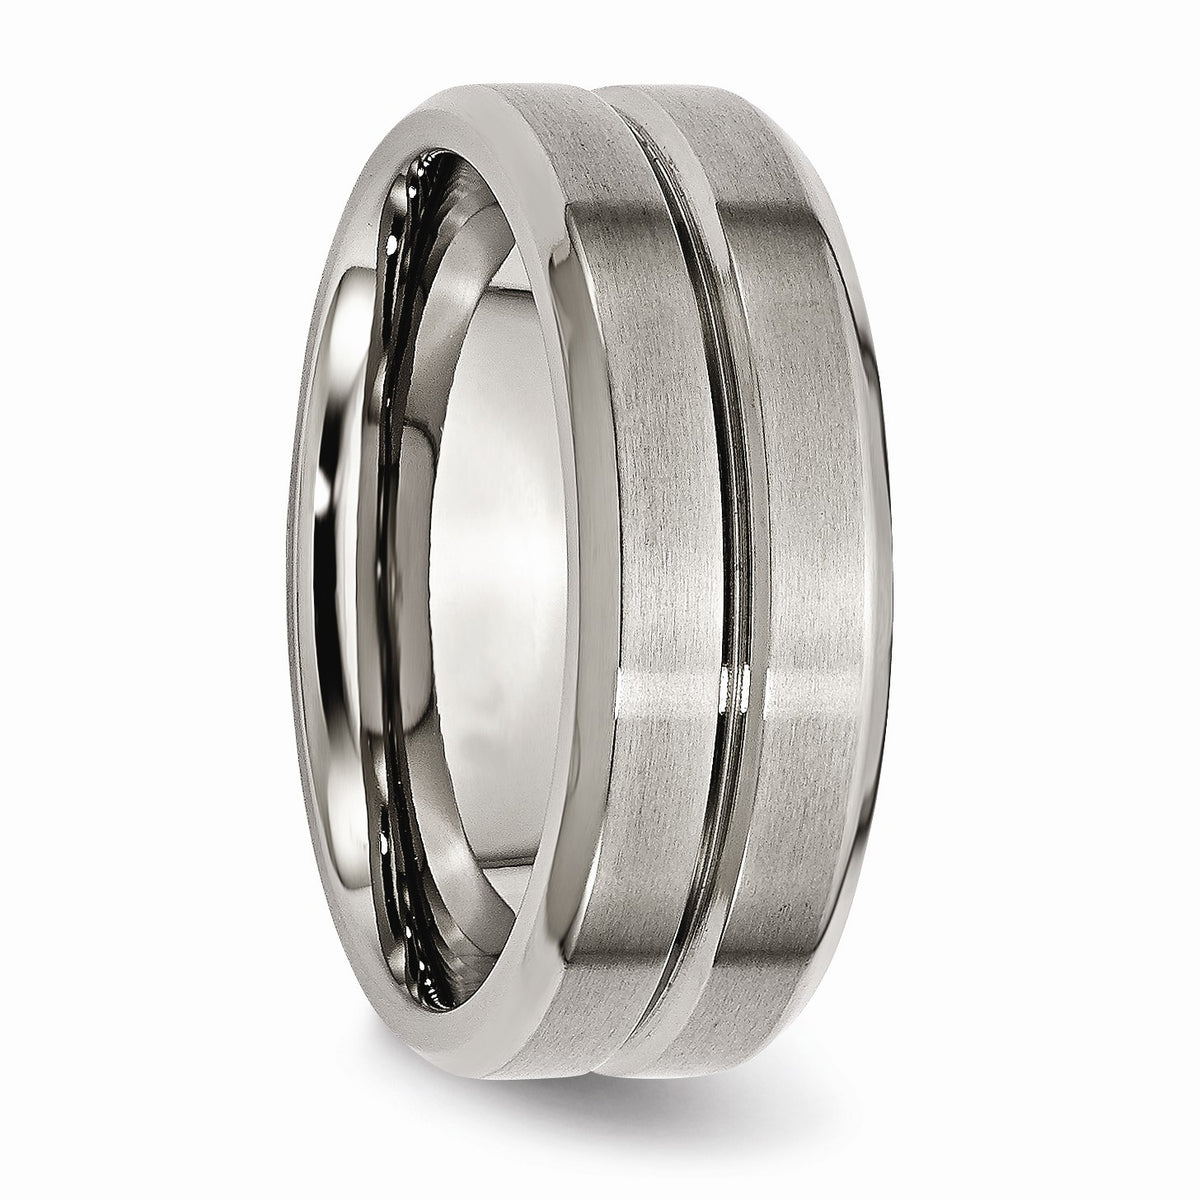 Alternate view of the Titanium 8mm Grooved And Beveled Edge Comfort Fit Band by The Black Bow Jewelry Co.